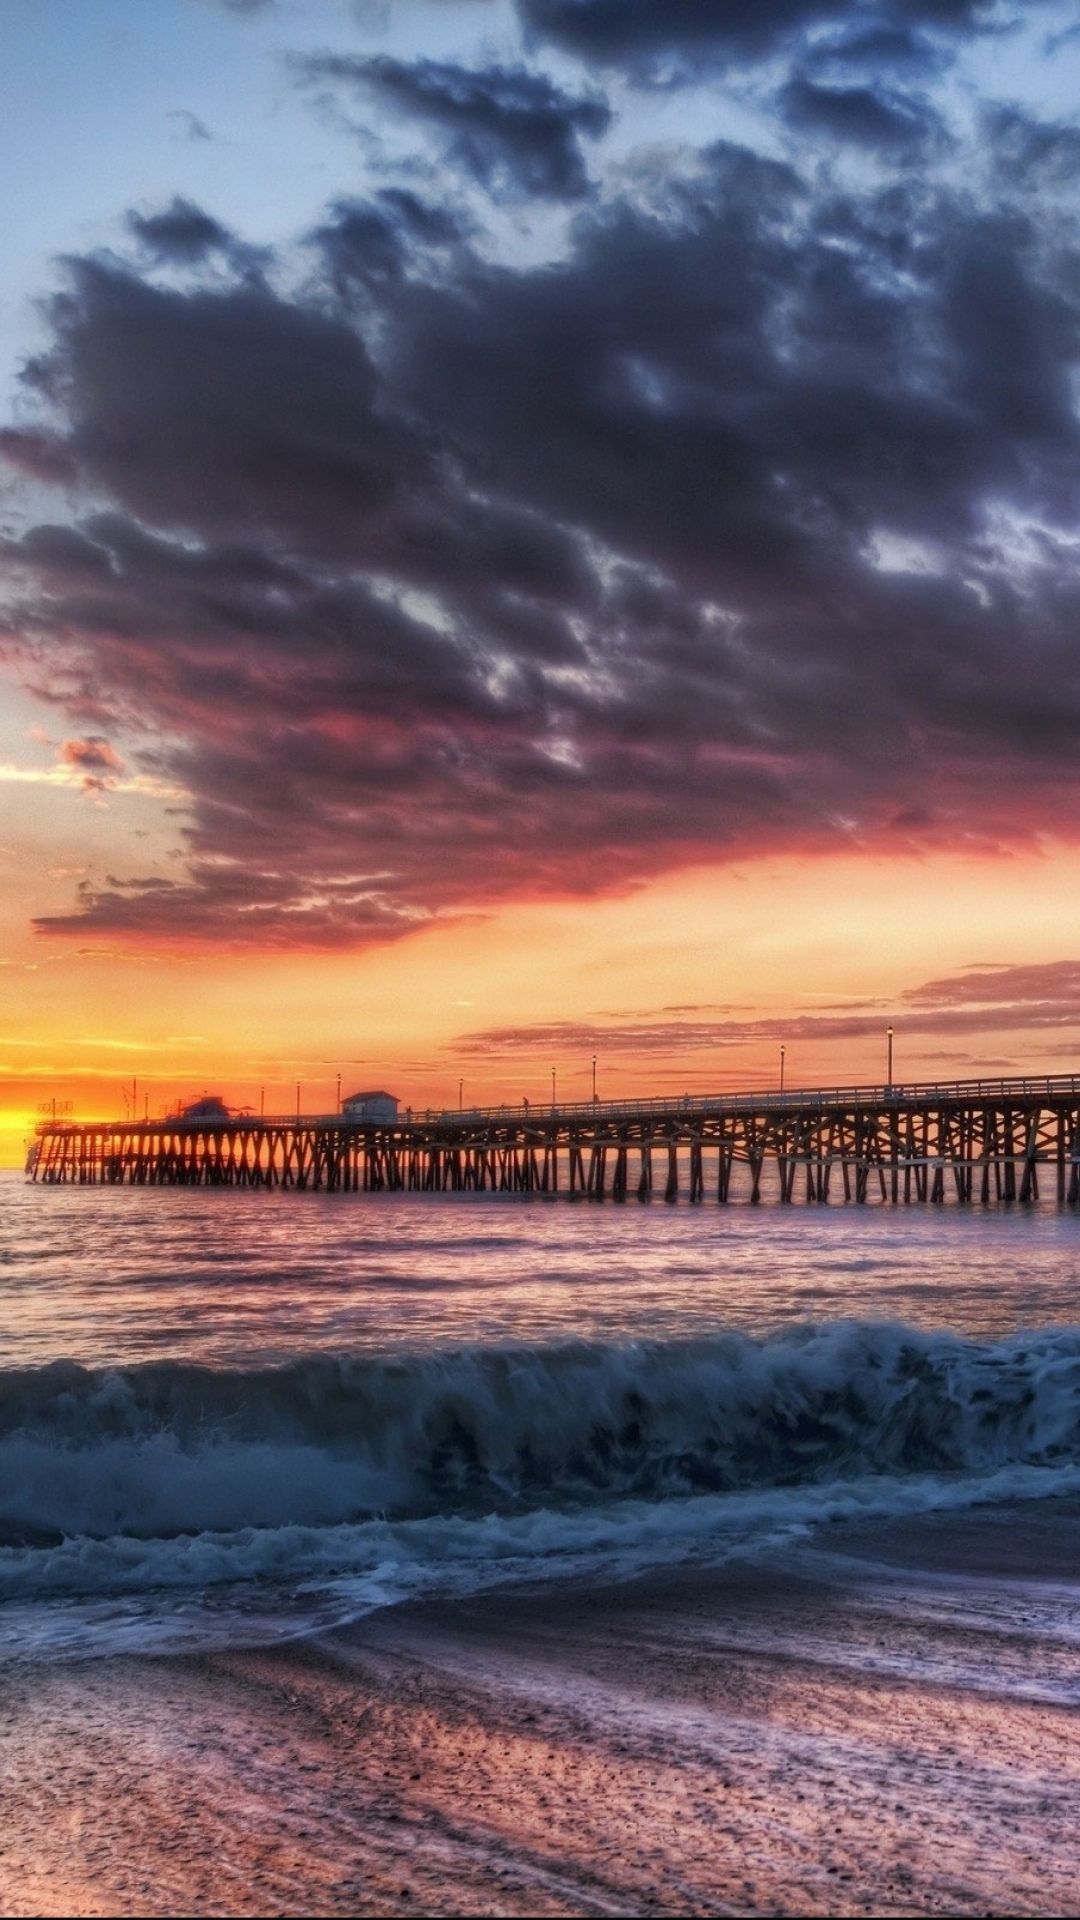 California Beach Dock Sunset Android Backgrounds